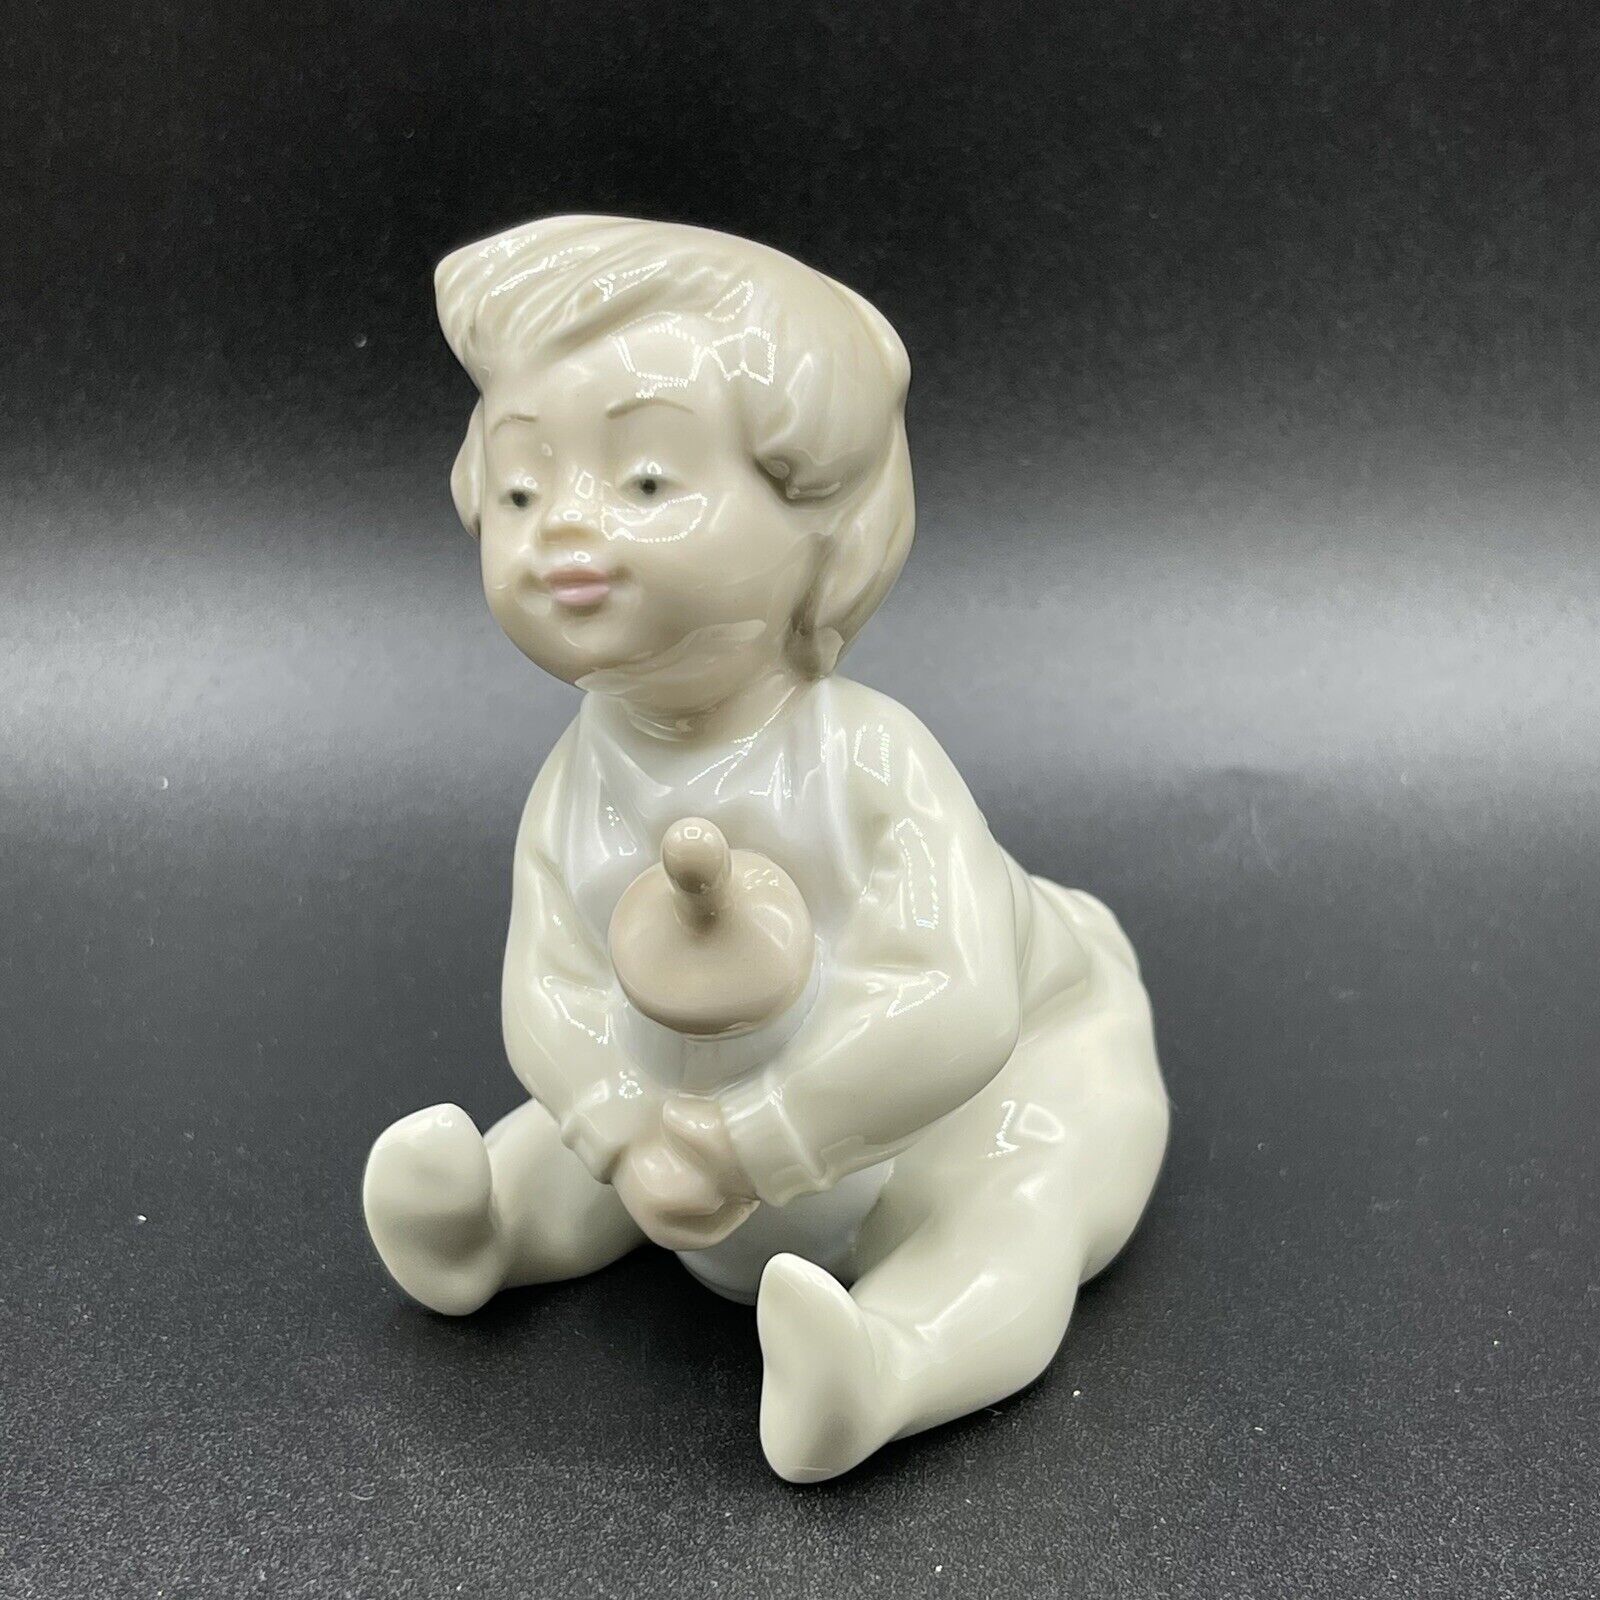 Vintage 1980’s Lladro NAO Porcelain Figurine Baby With Bottle Retired Spain